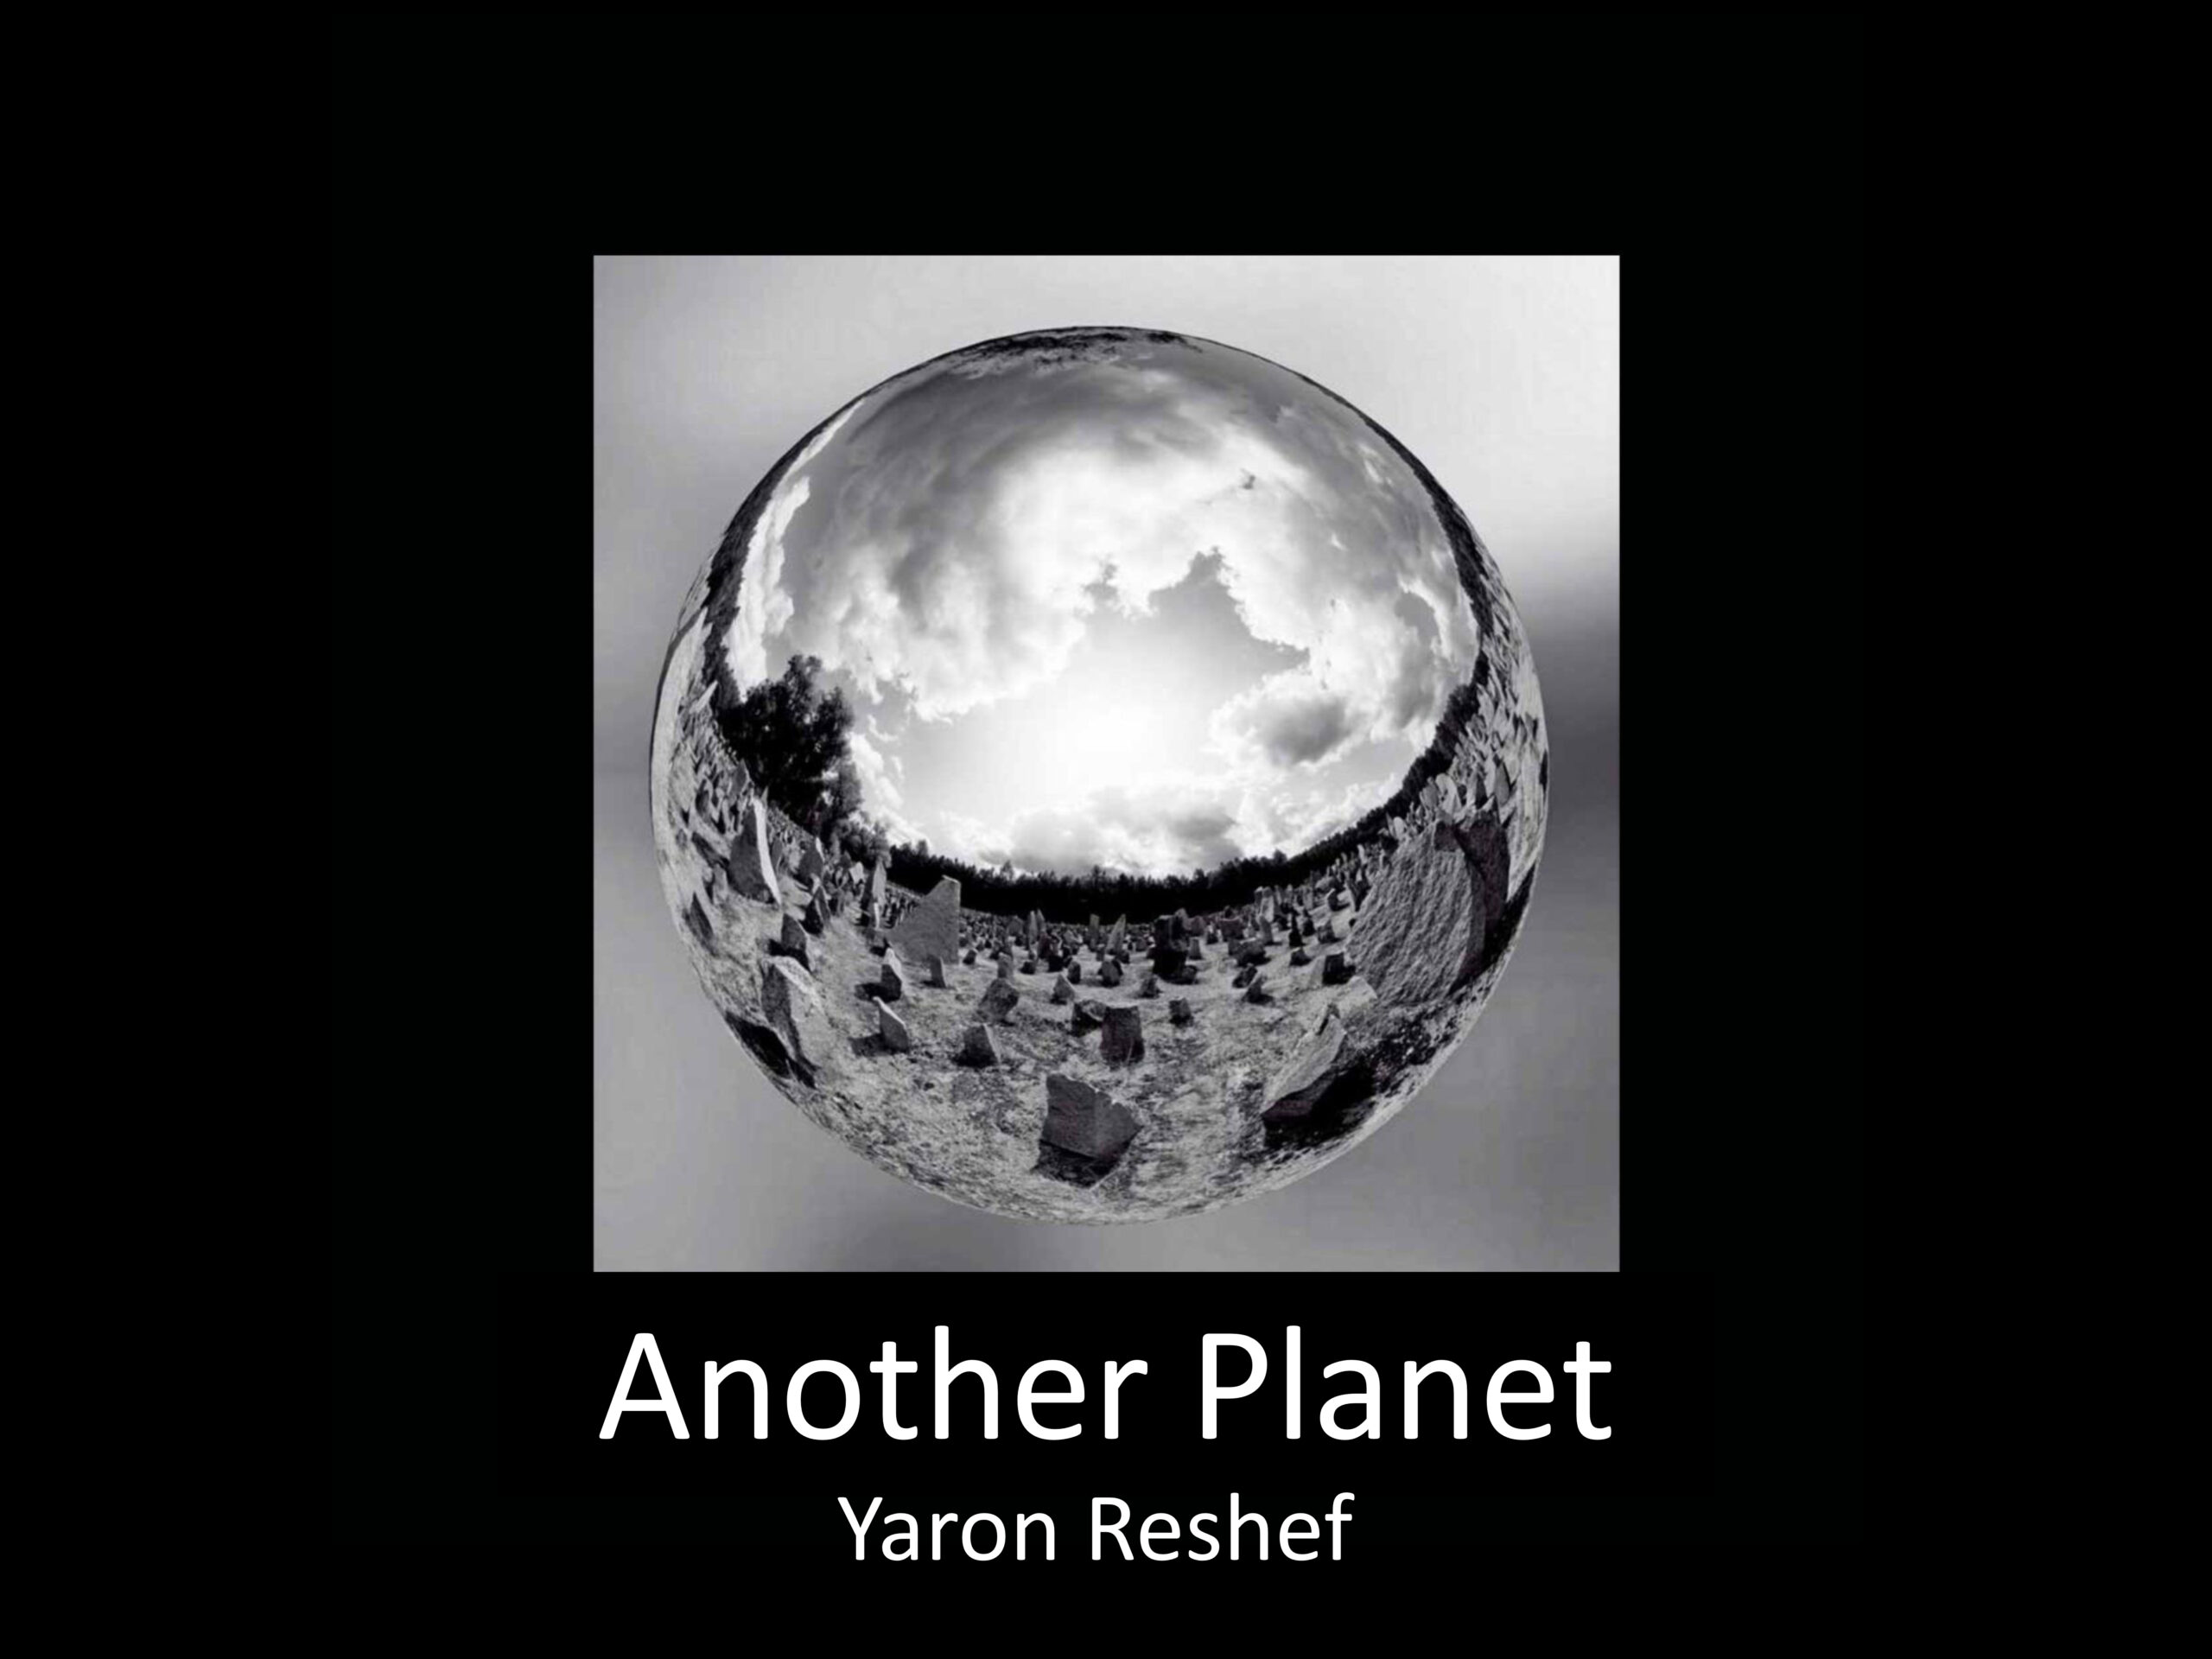 FREE: Another Planet by Yaron Reshef